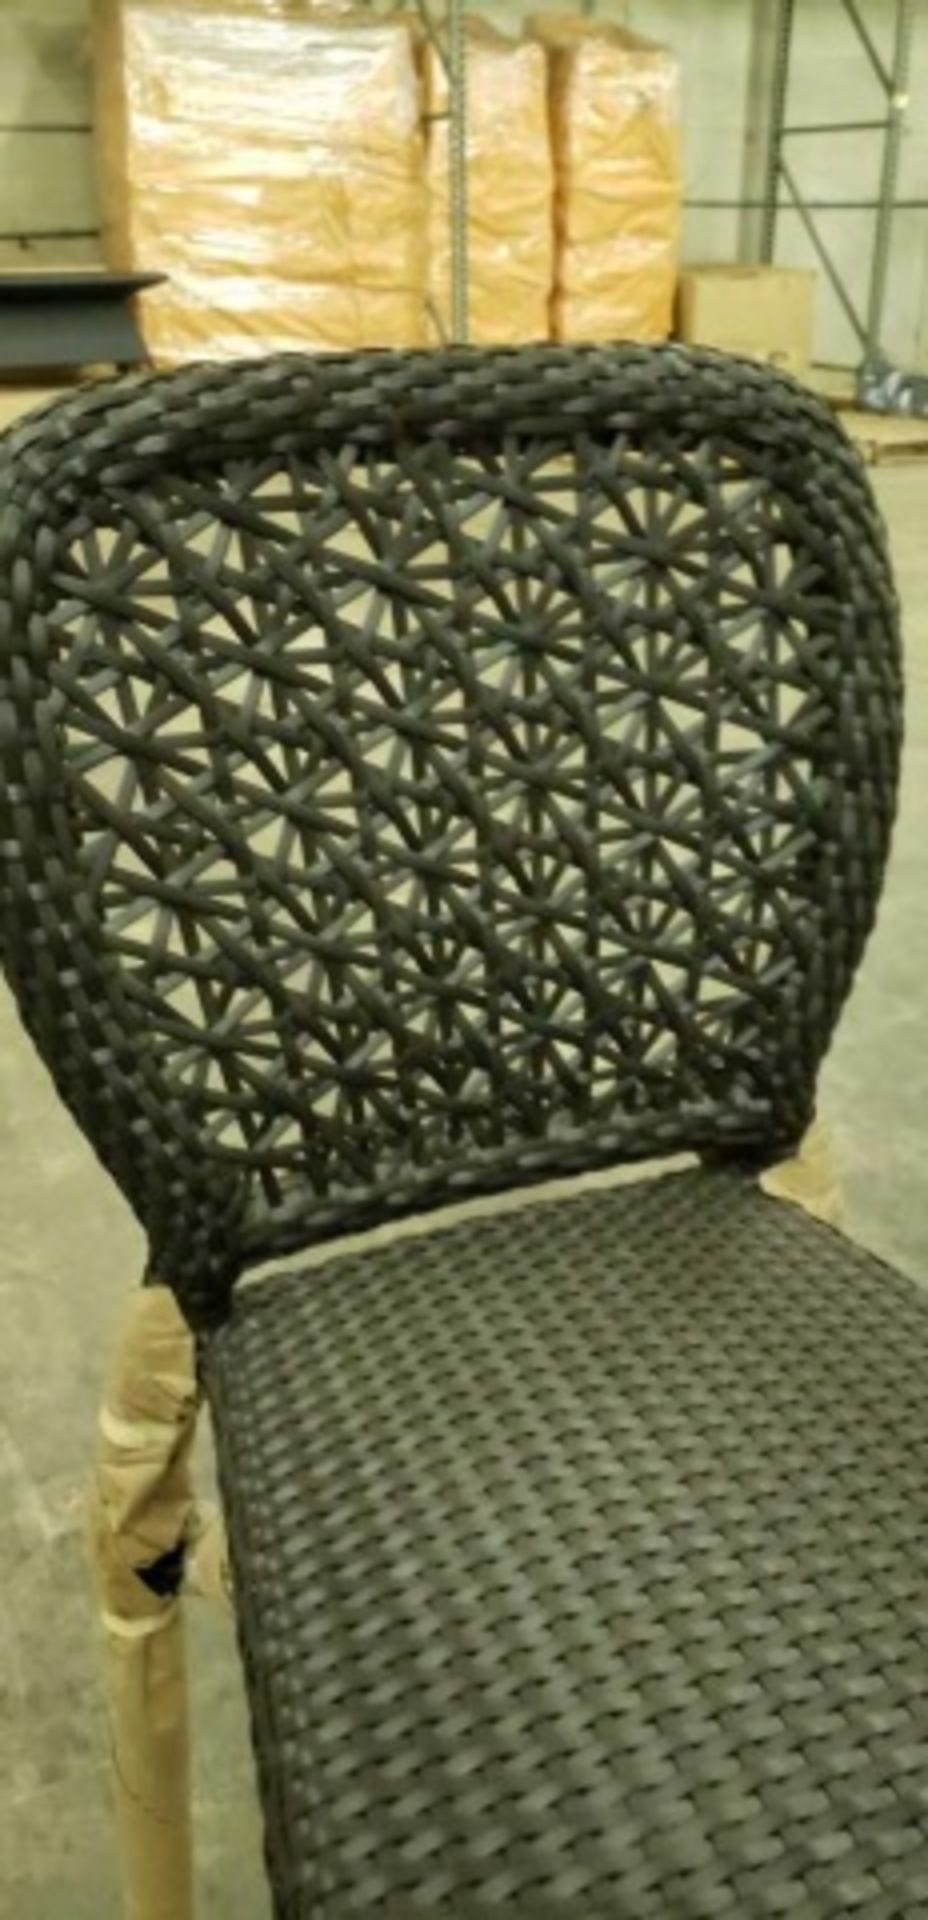 Jessie Barstool - Expresso, C09 JES BS EXP CH. Star Weave Back. 2 stacks with 6 each, plus 3 - Image 4 of 6